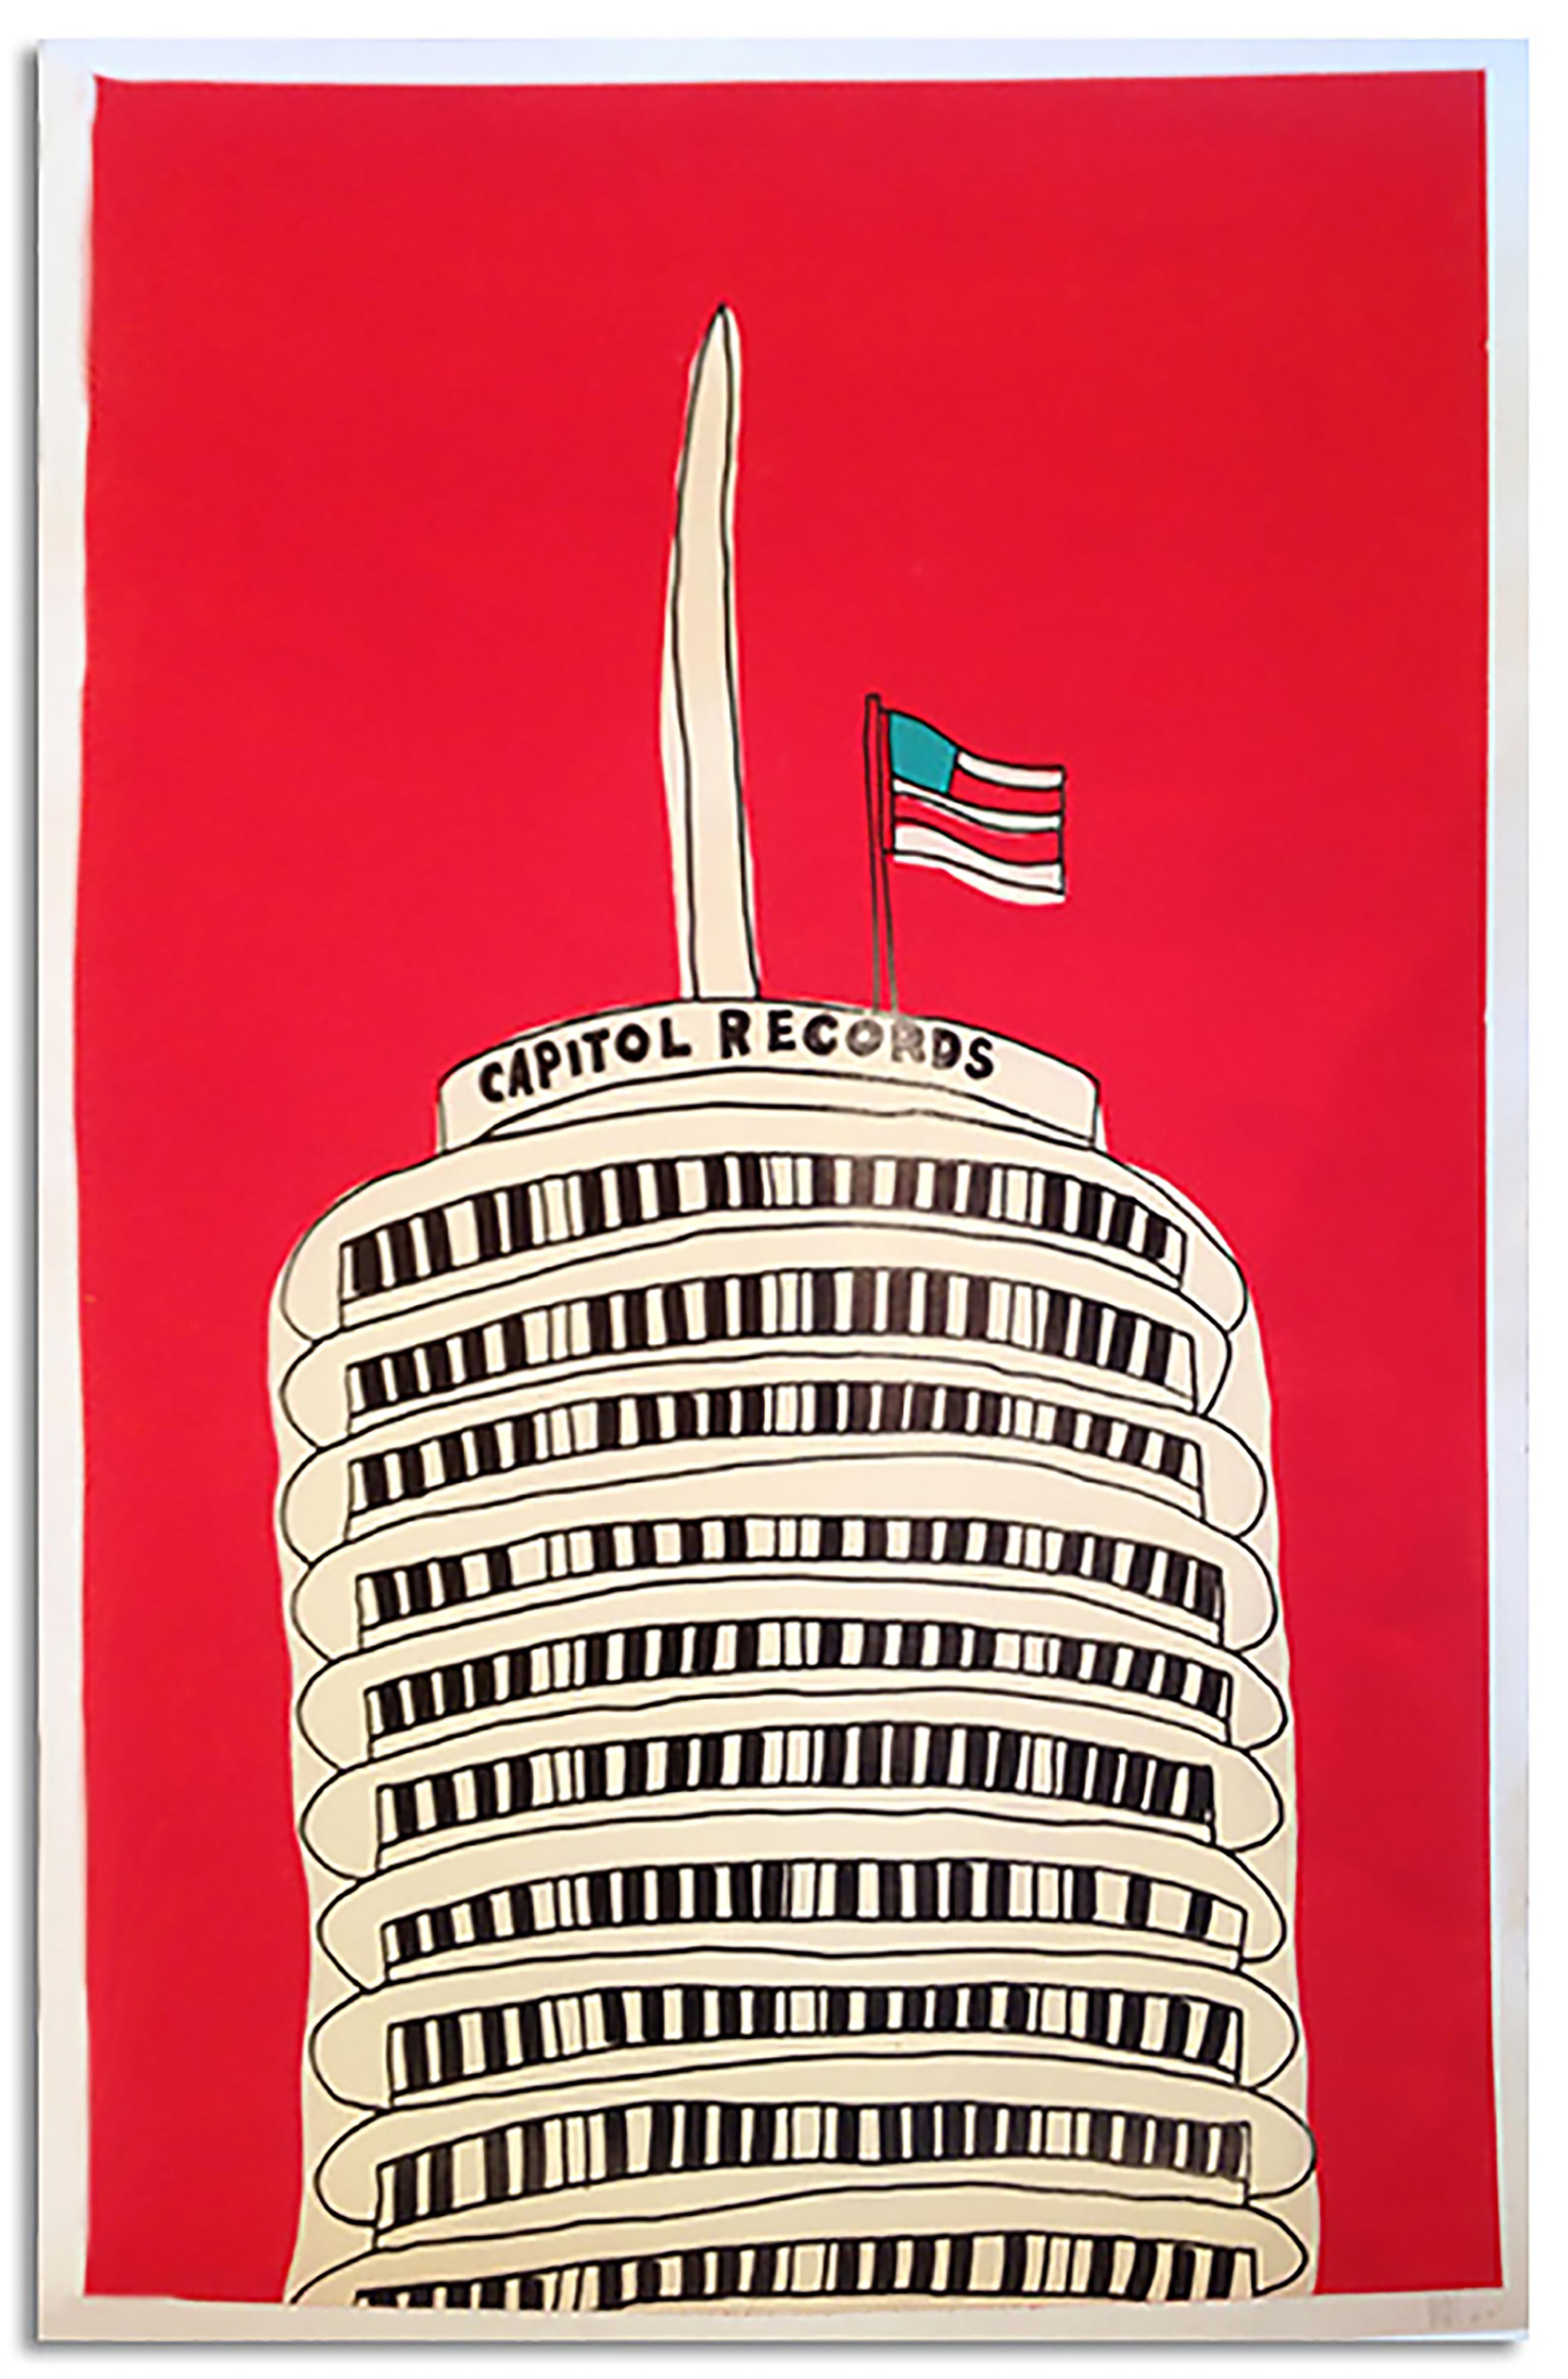 Marz Junior Figurative Painting - "Capitol Records Building"-Red Acrylic & Ink on Paper 